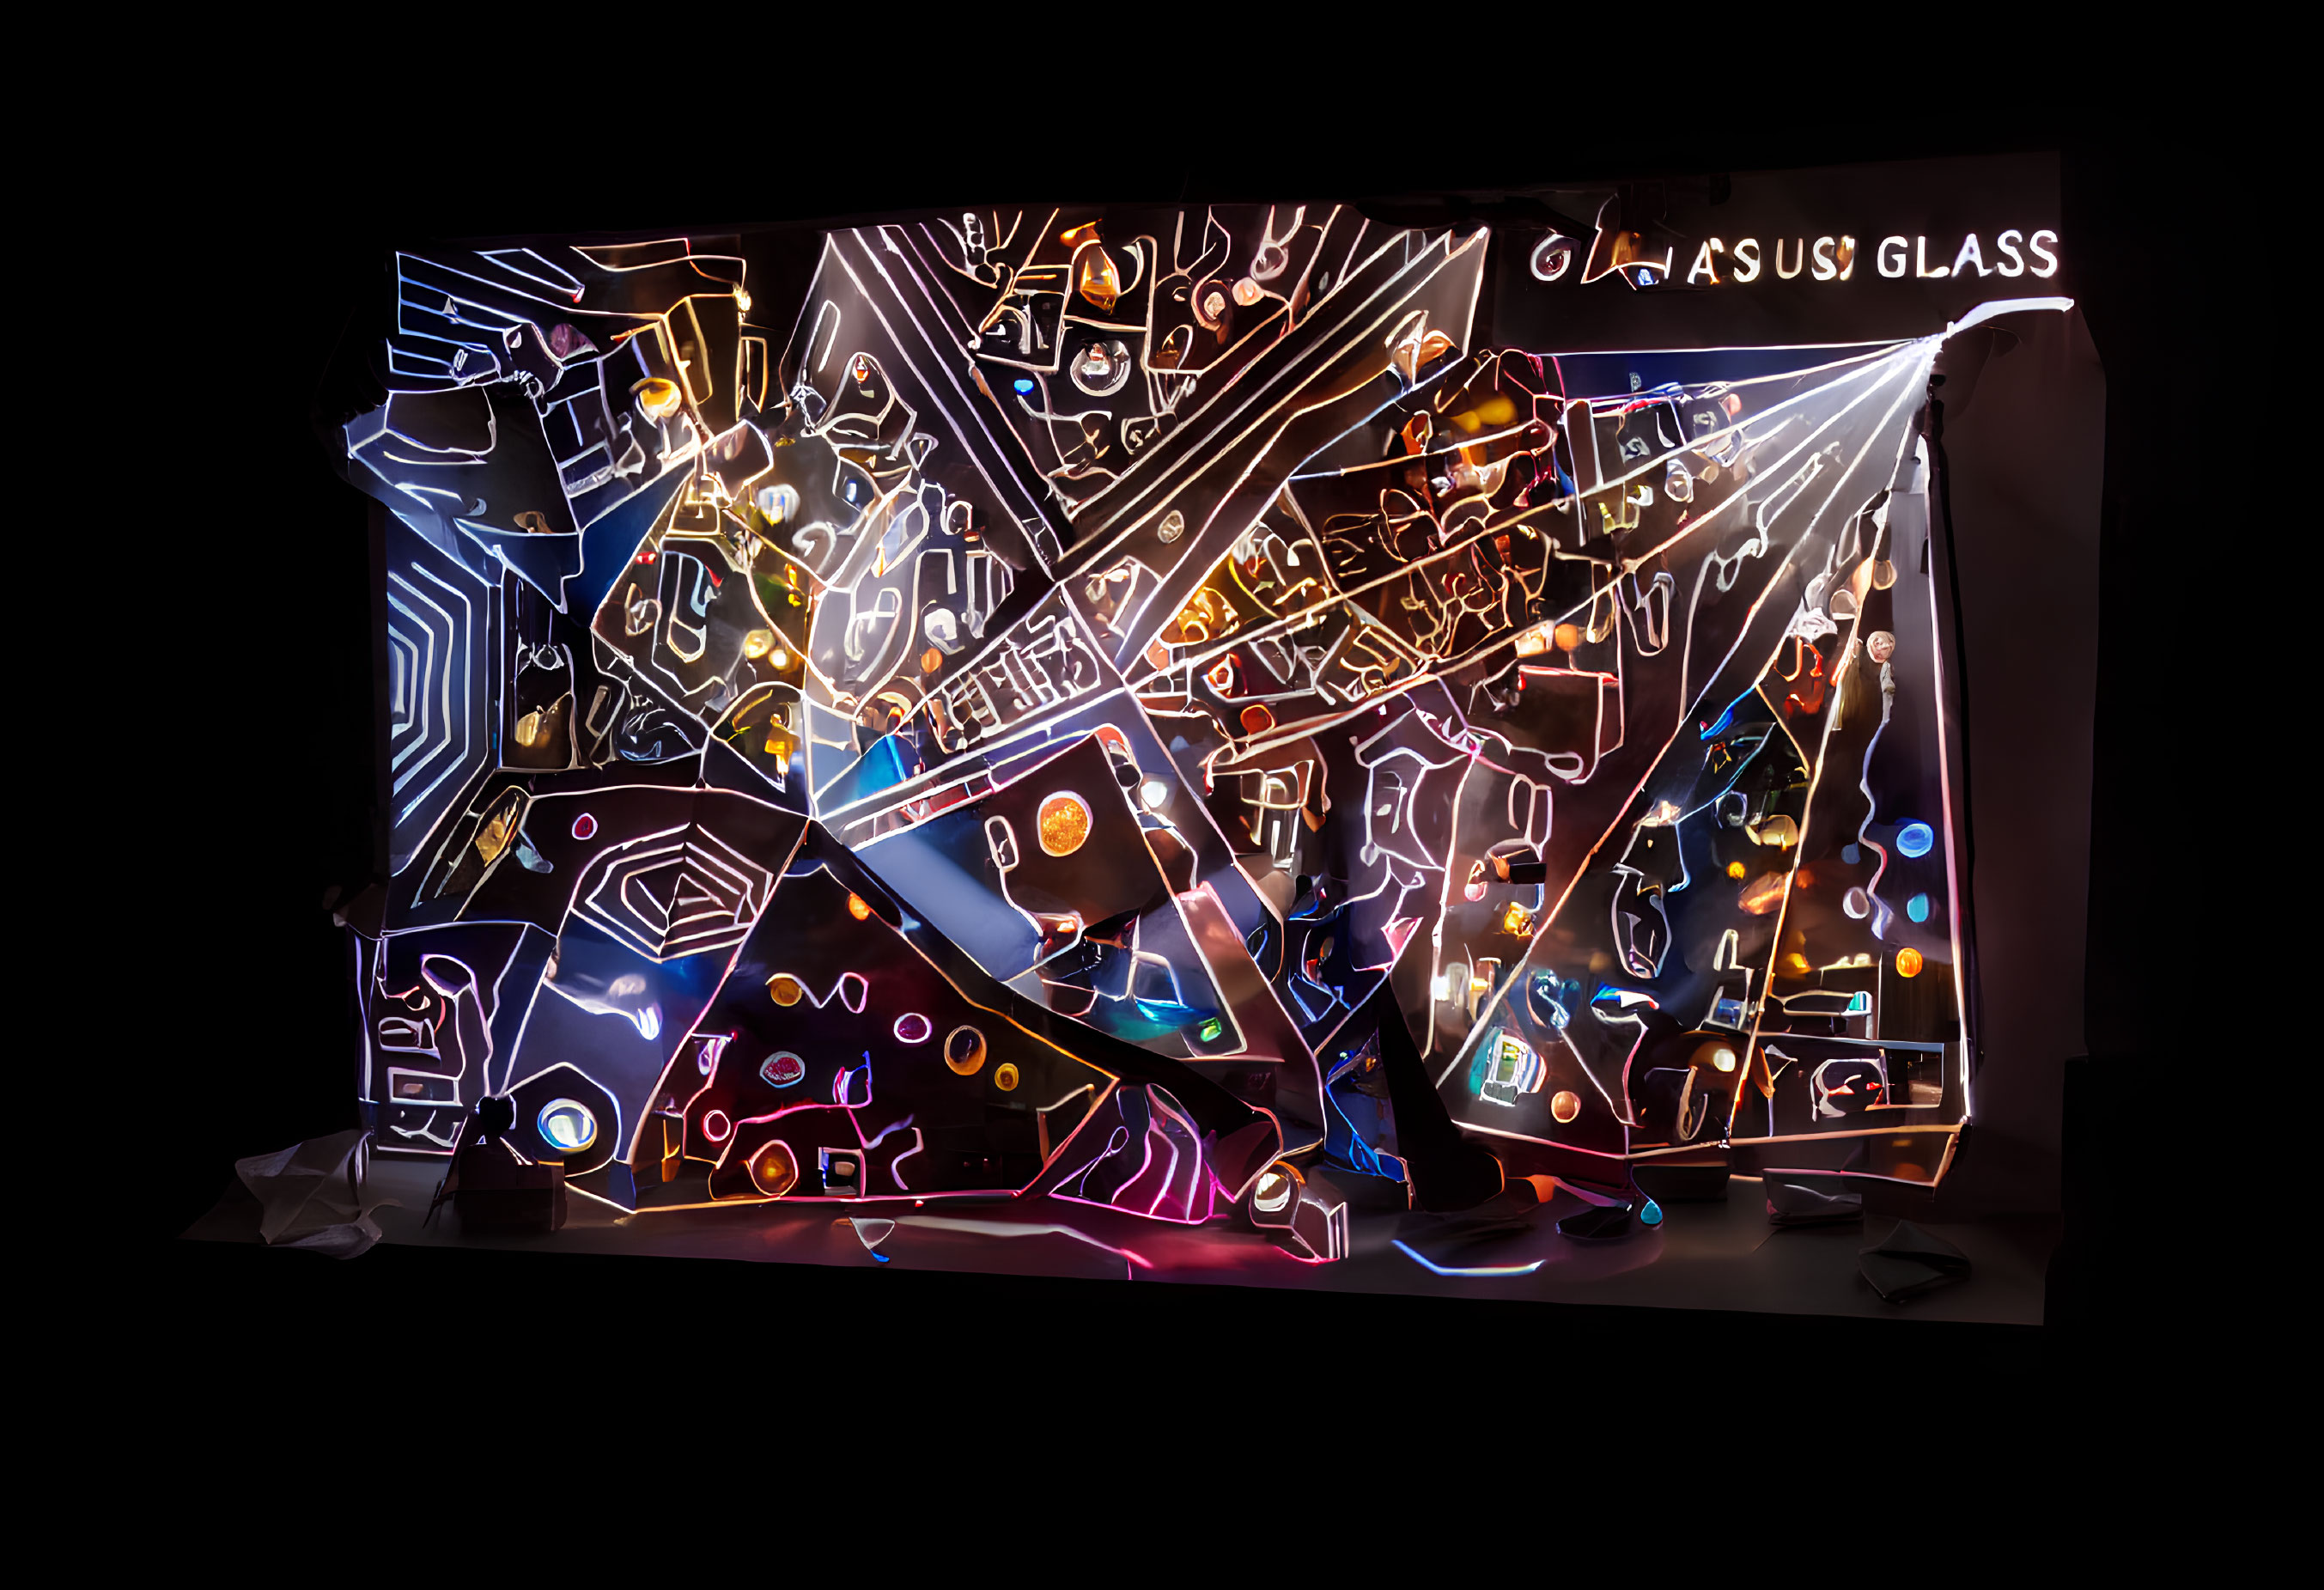 Colorful Neon Glass Art Installation with Intricate Patterns and Glowing Colors